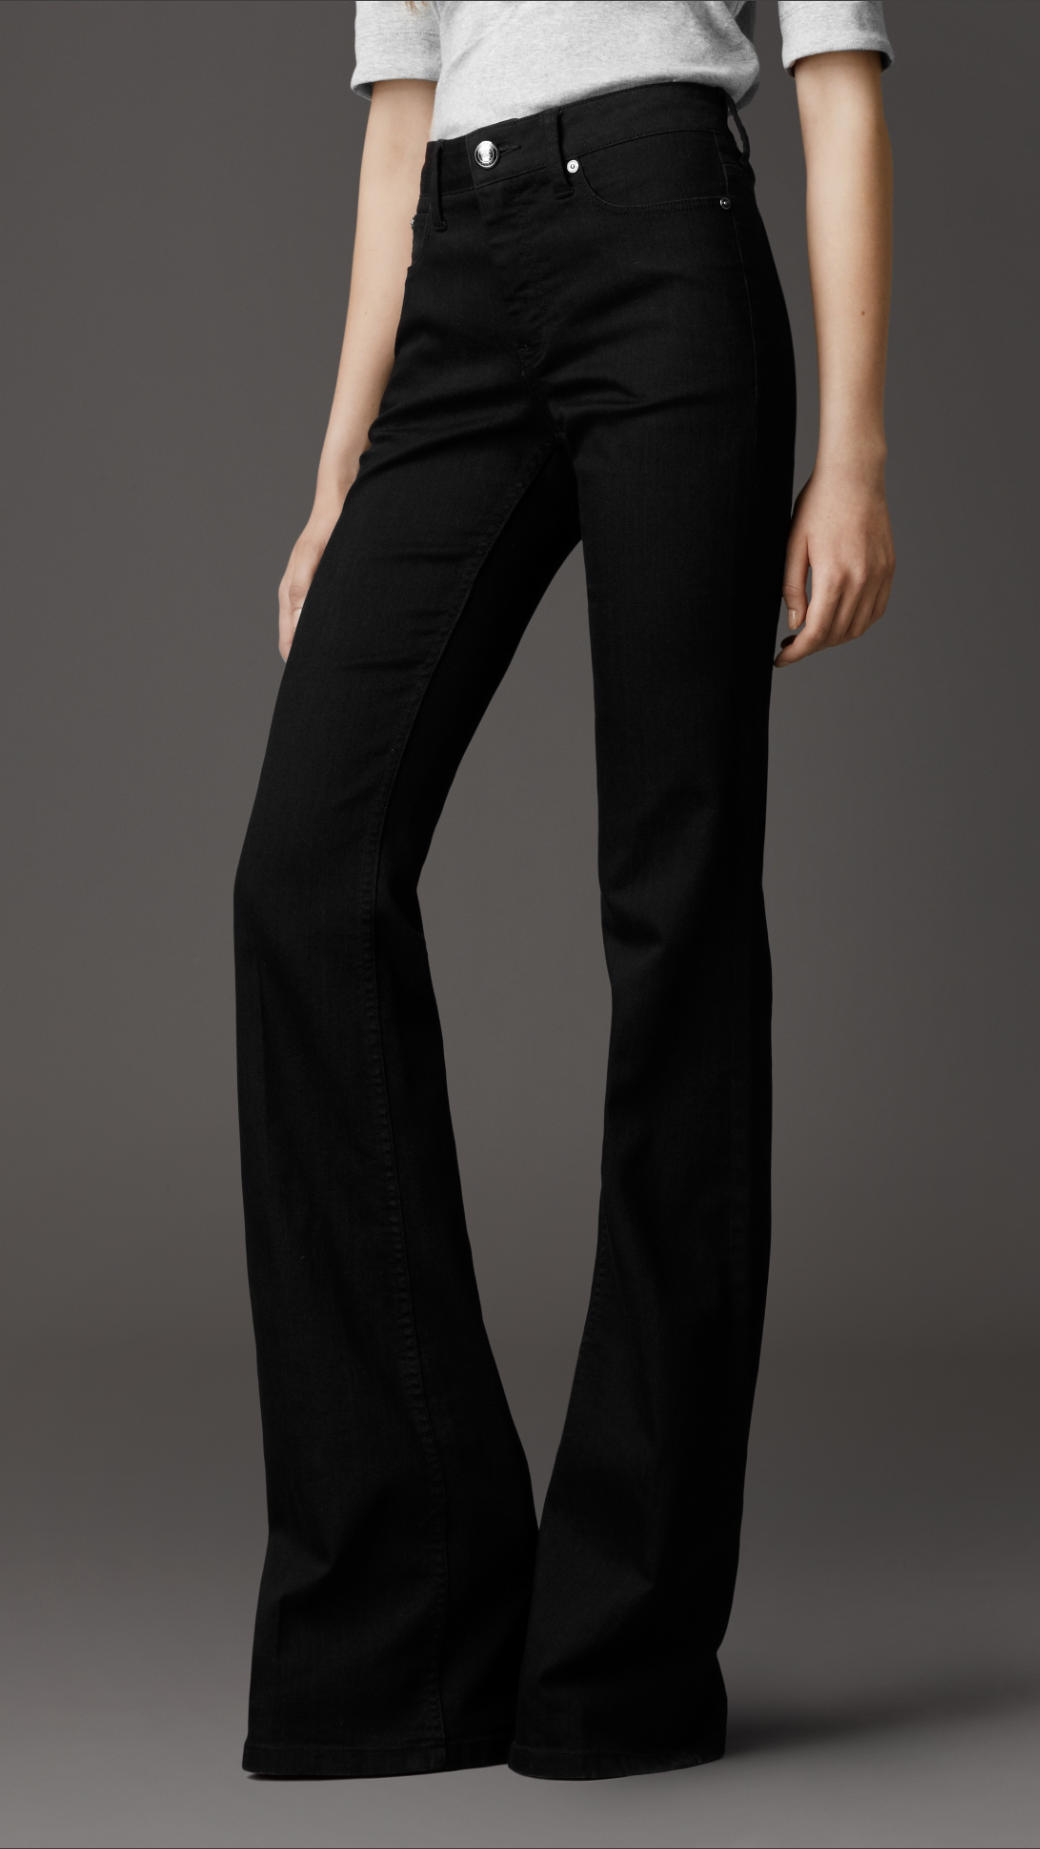 Lyst - Burberry Silton Black Flared Jeans in Black